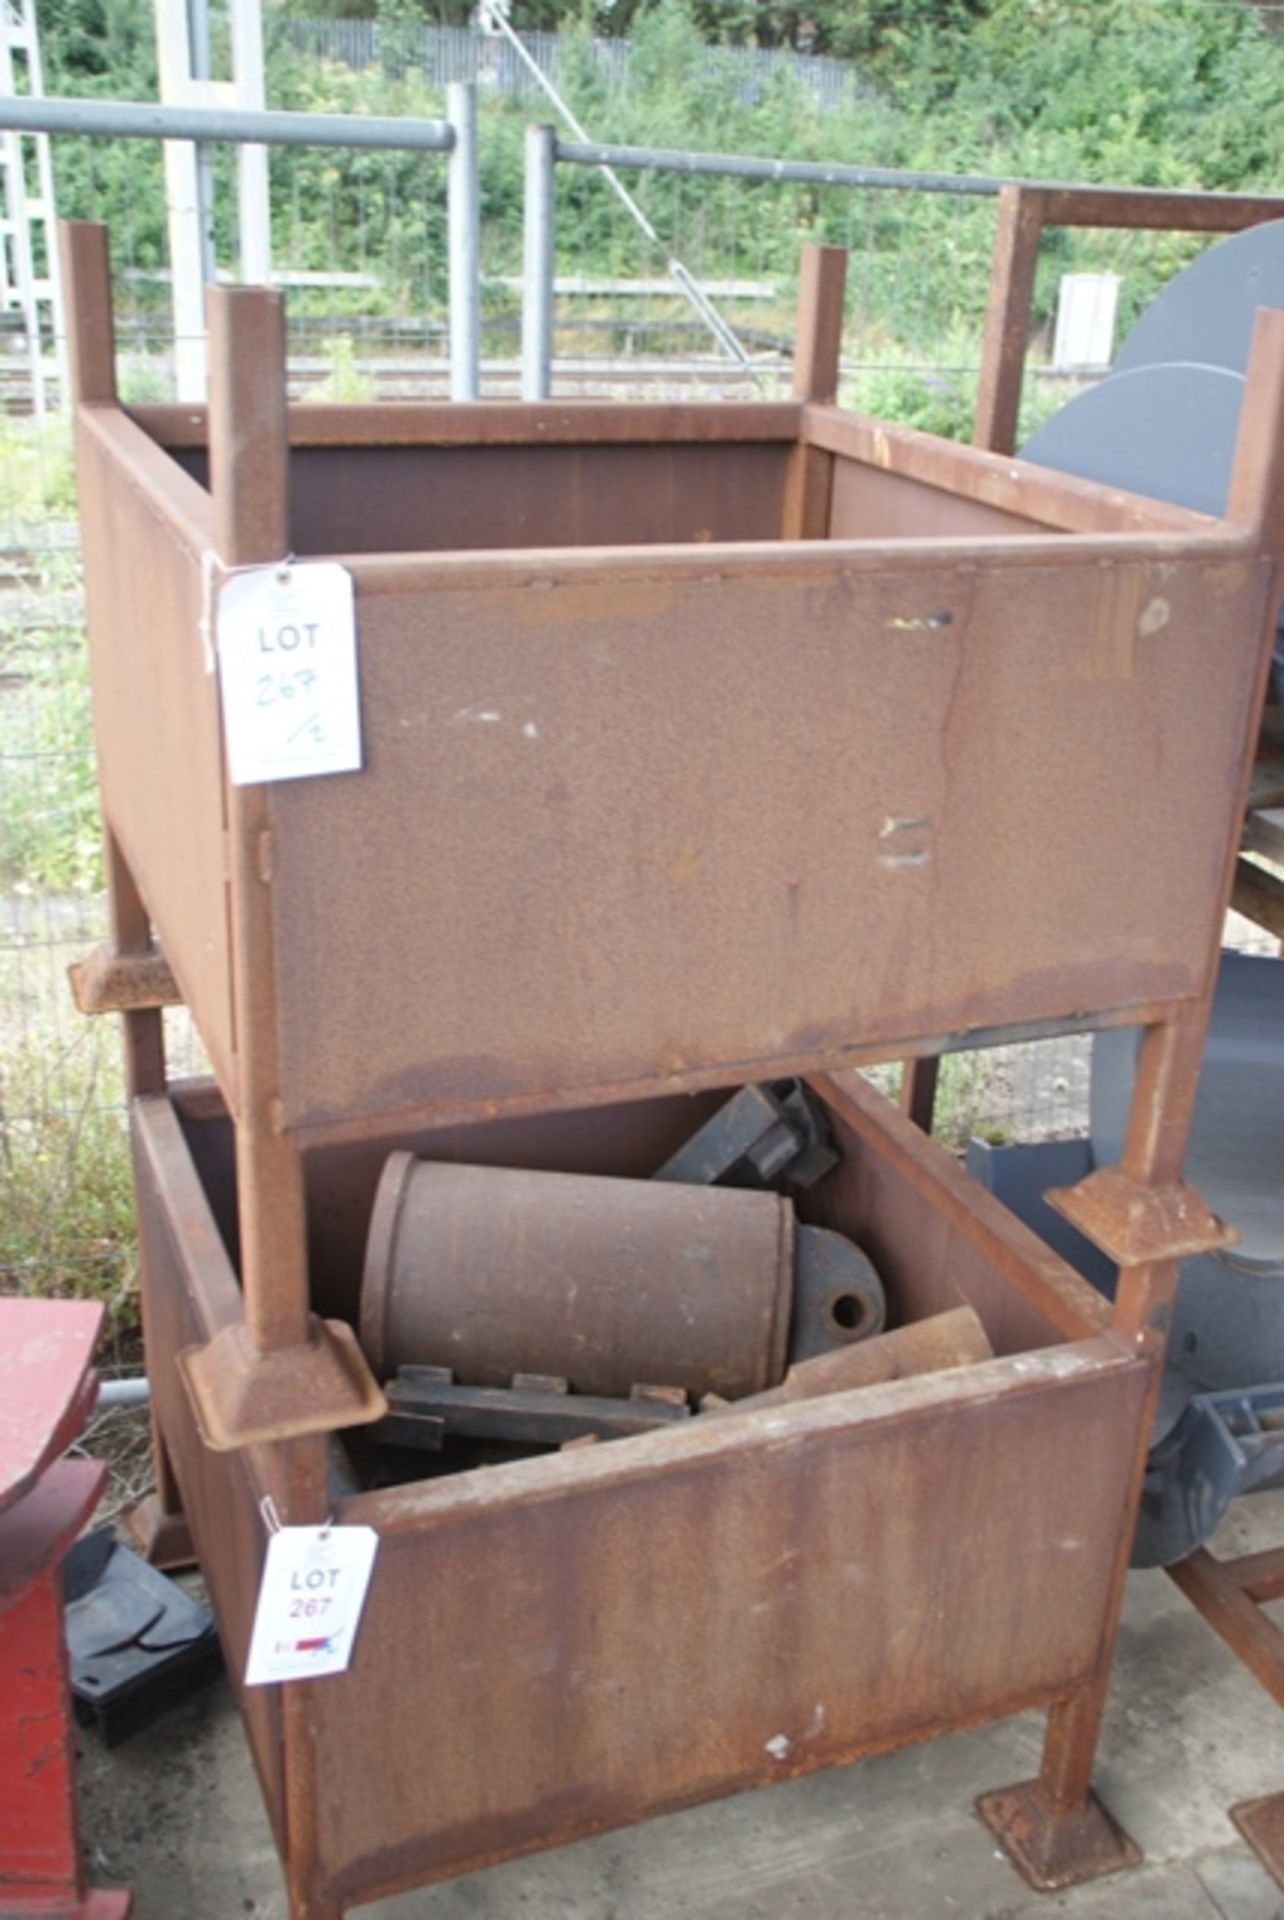 Two stillages of miscellaneous piling equipment